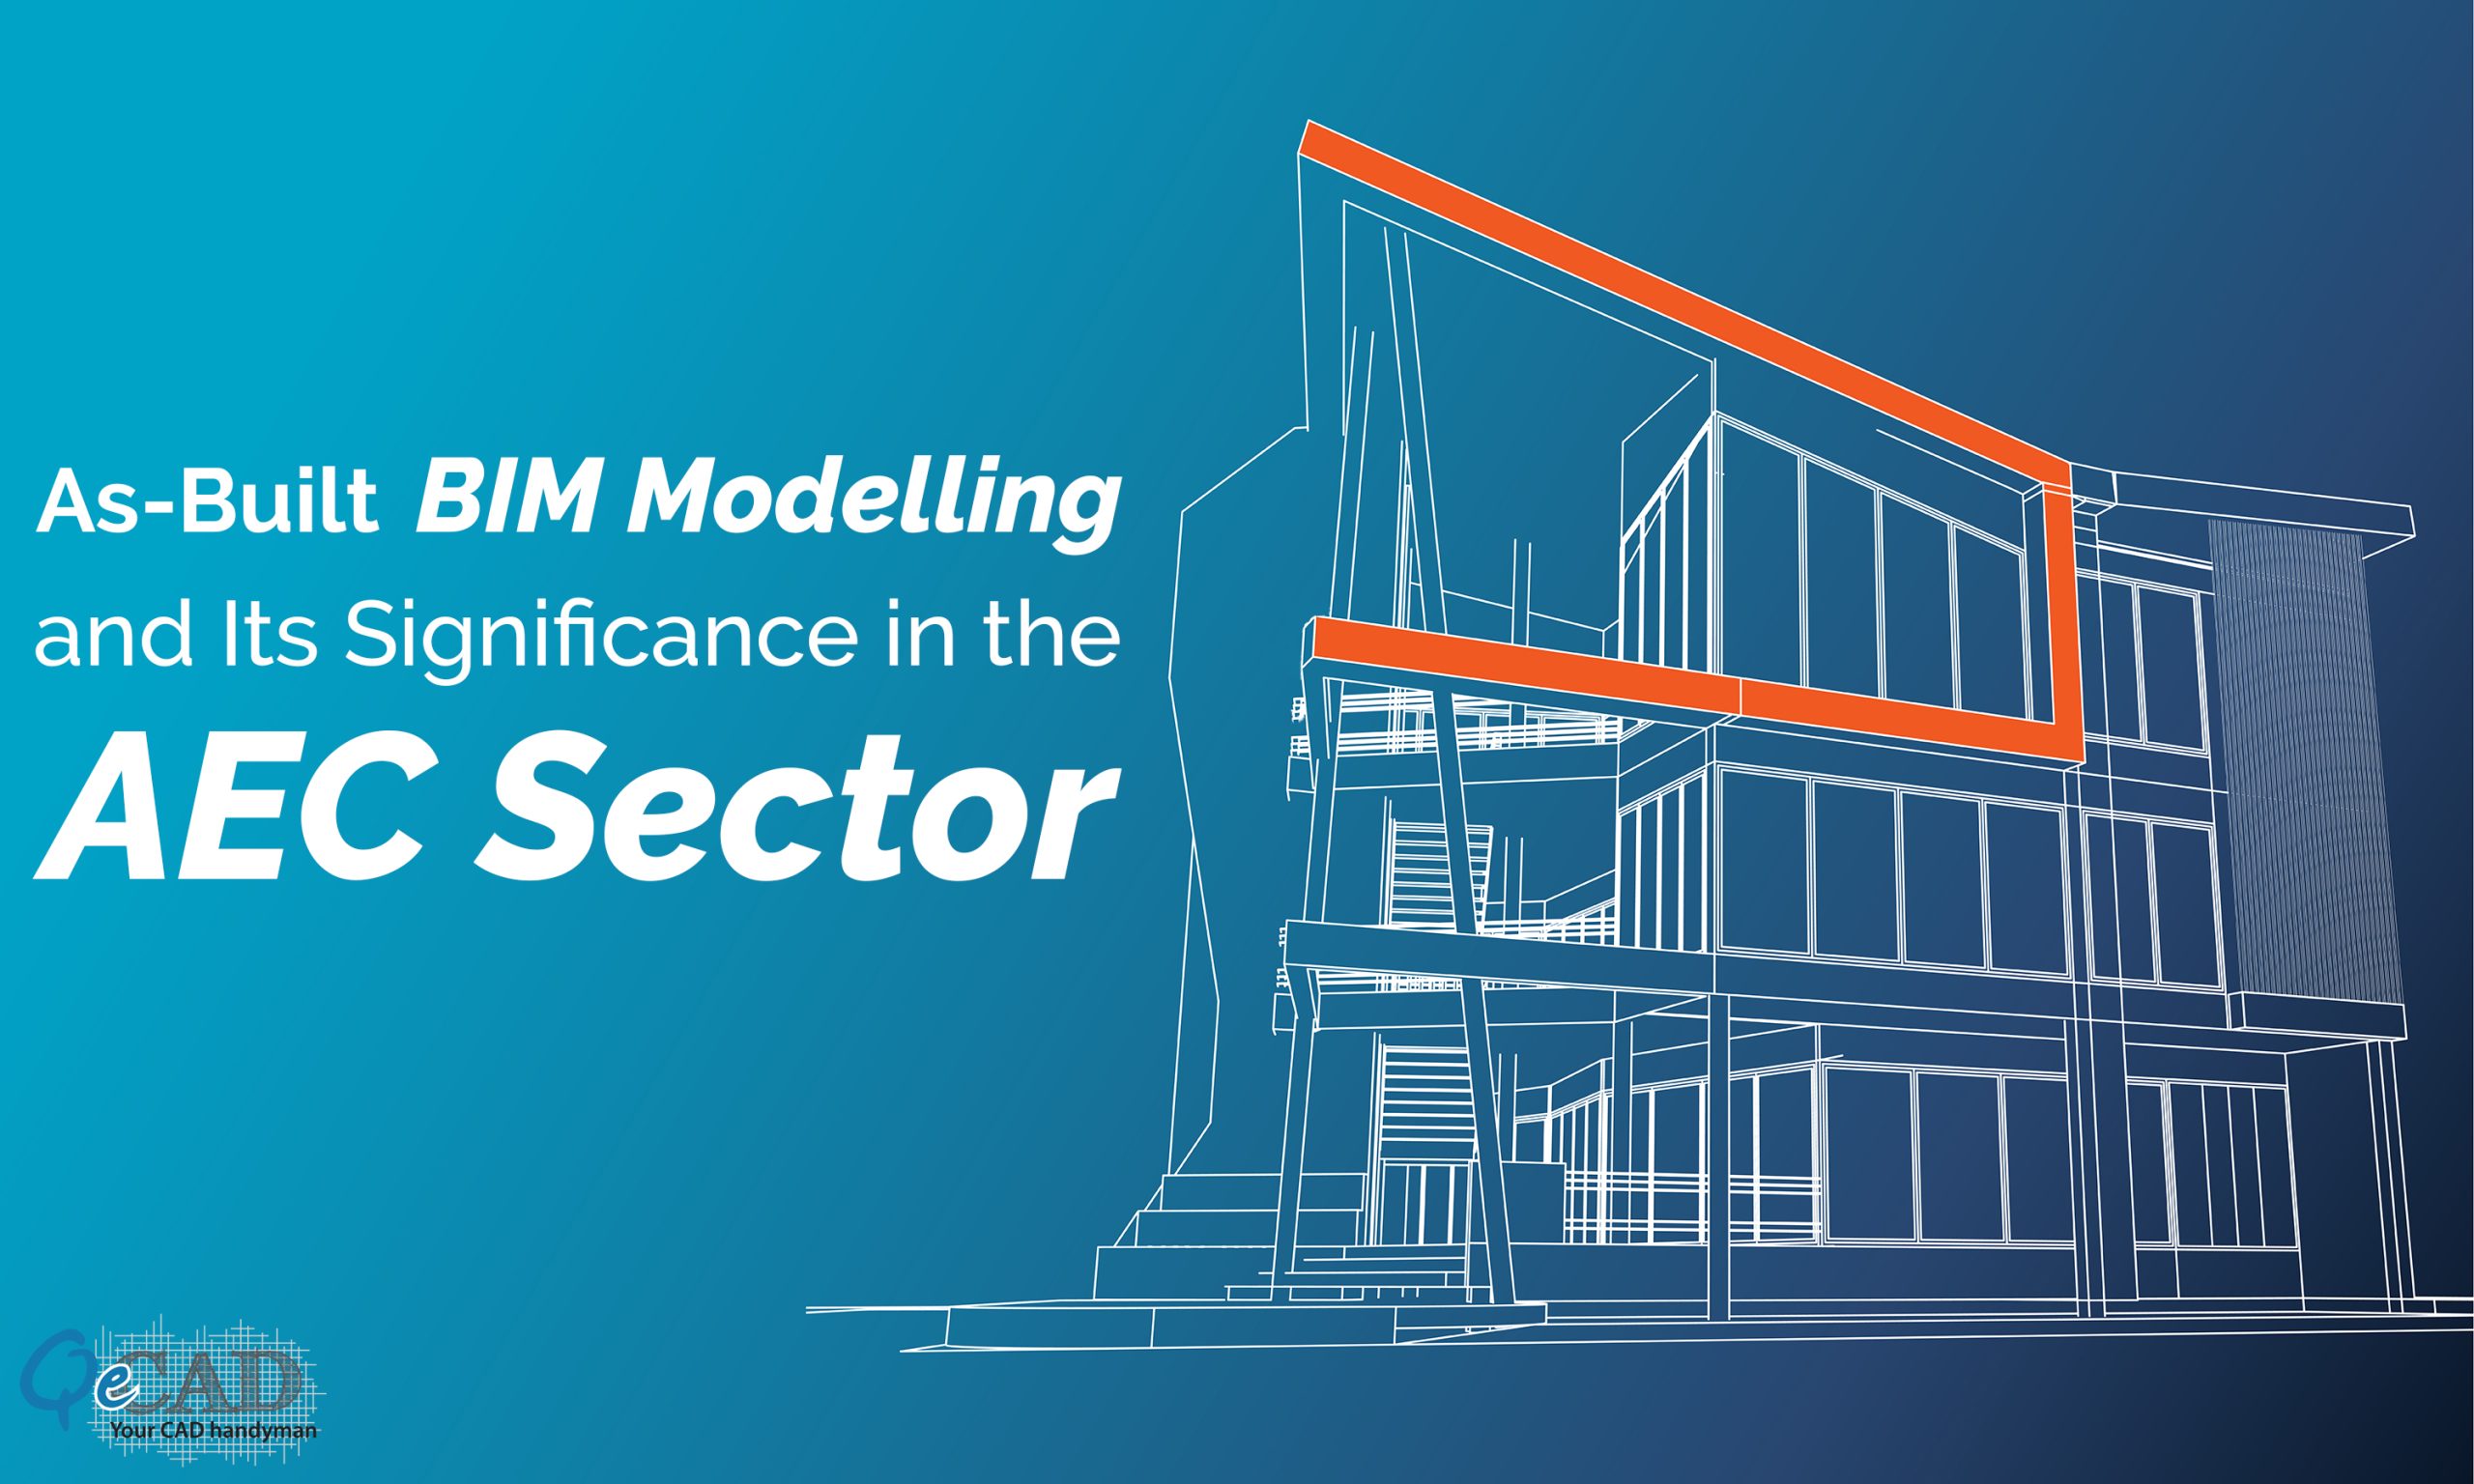 As-Built BIM Modelling and Its Significance in the AEC Sector